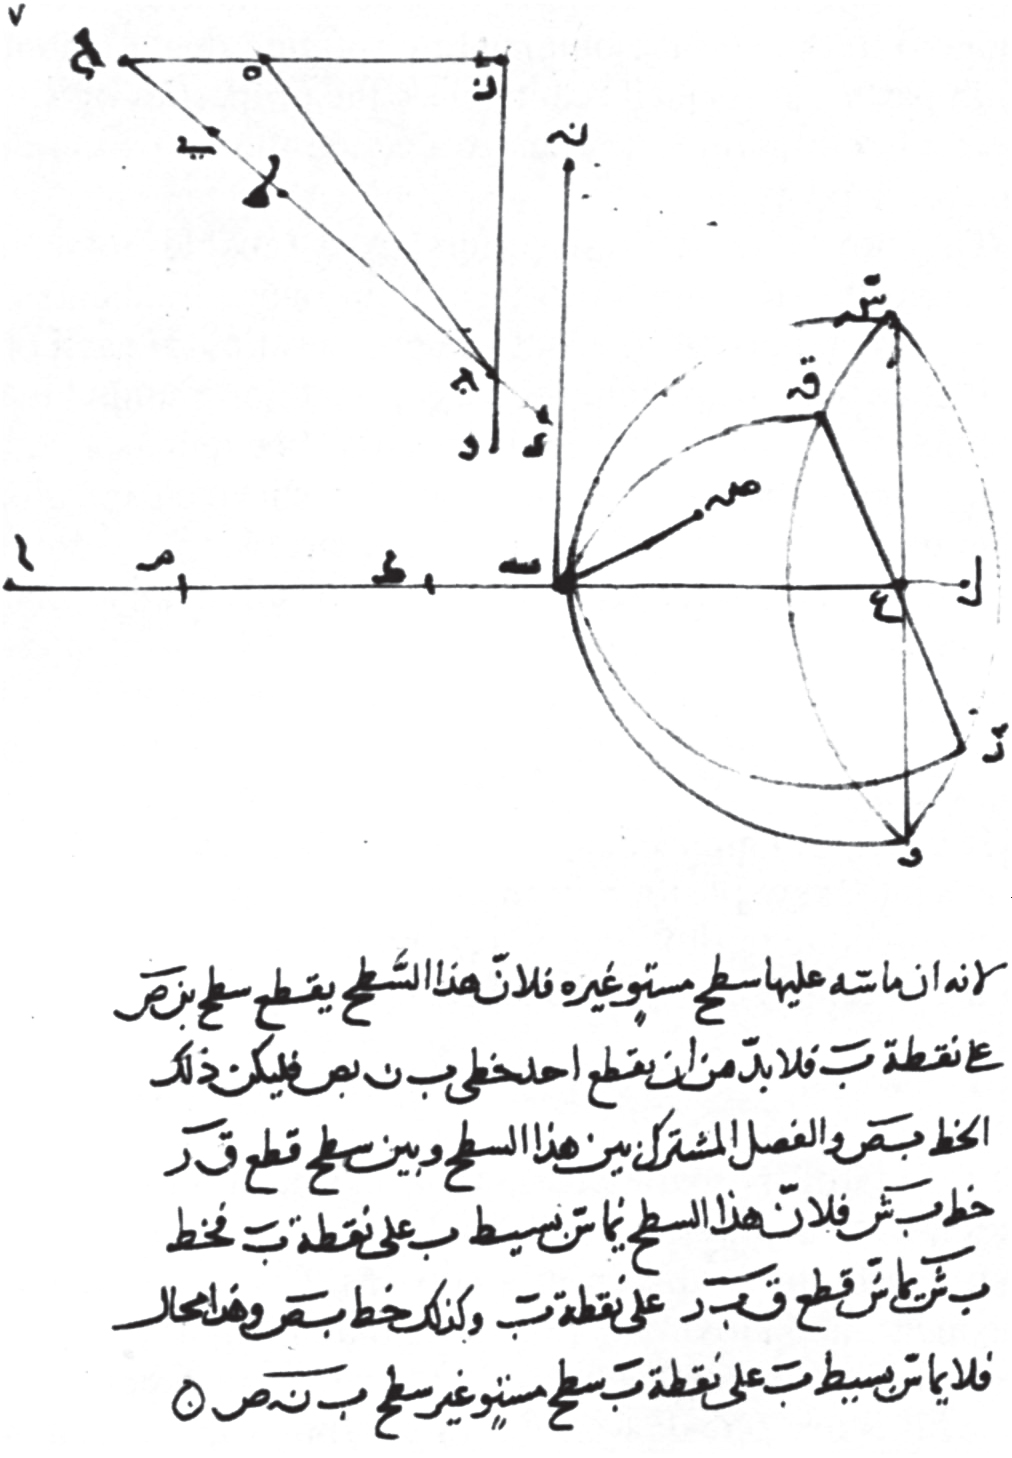 Schematic illustration of re-creation of Ibn Sahl algebra graphics from Wikipedia